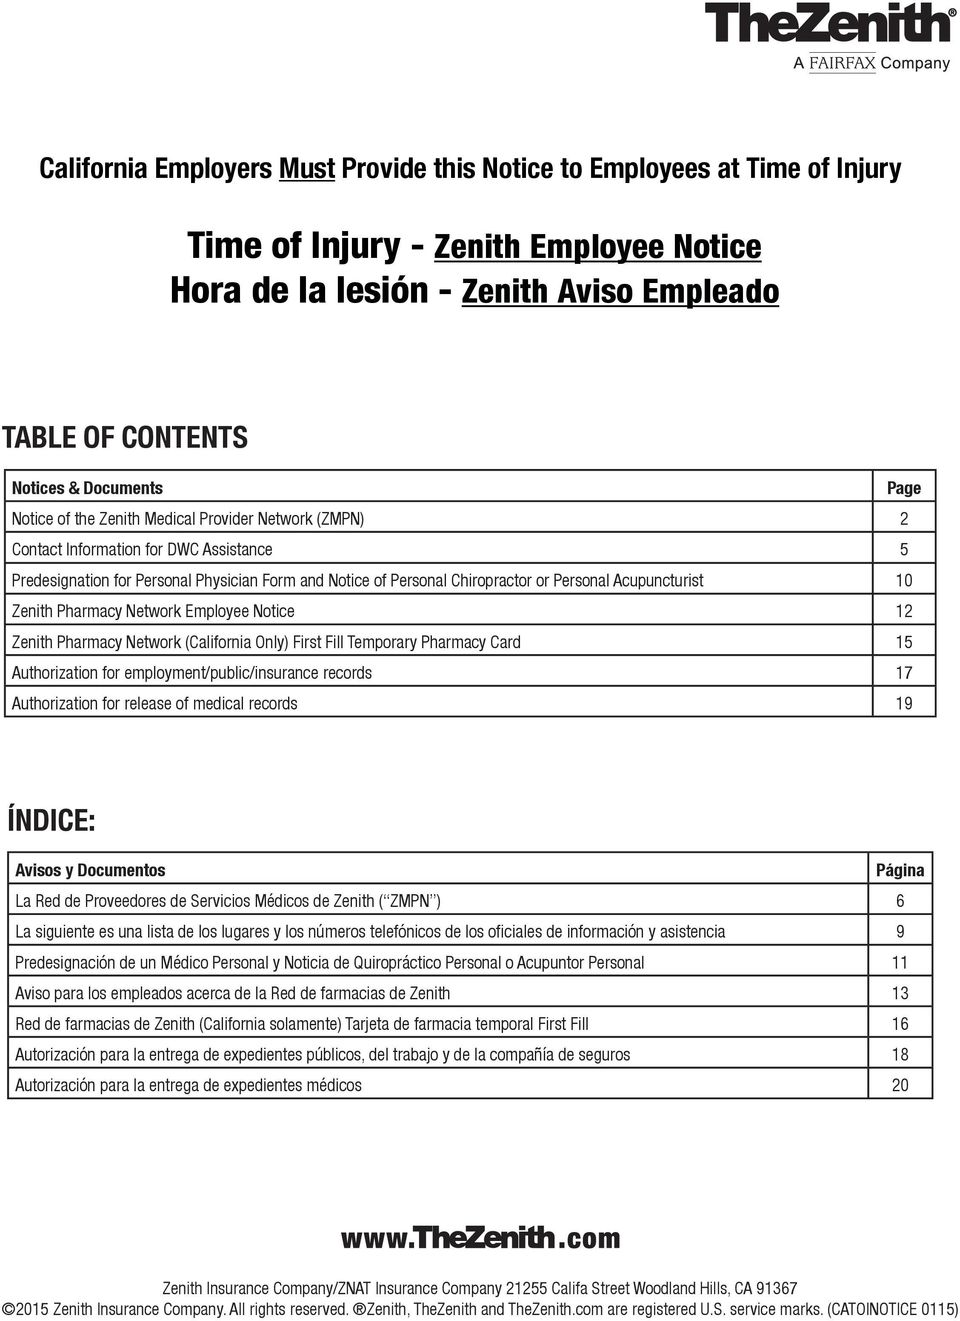 Acupuncturist 10 Zenith Pharmacy Network Employee Notice 12 Zenith Pharmacy Network (California Only) First Fill Temporary Pharmacy Card 15 Authorization for employment/public/insurance records 17